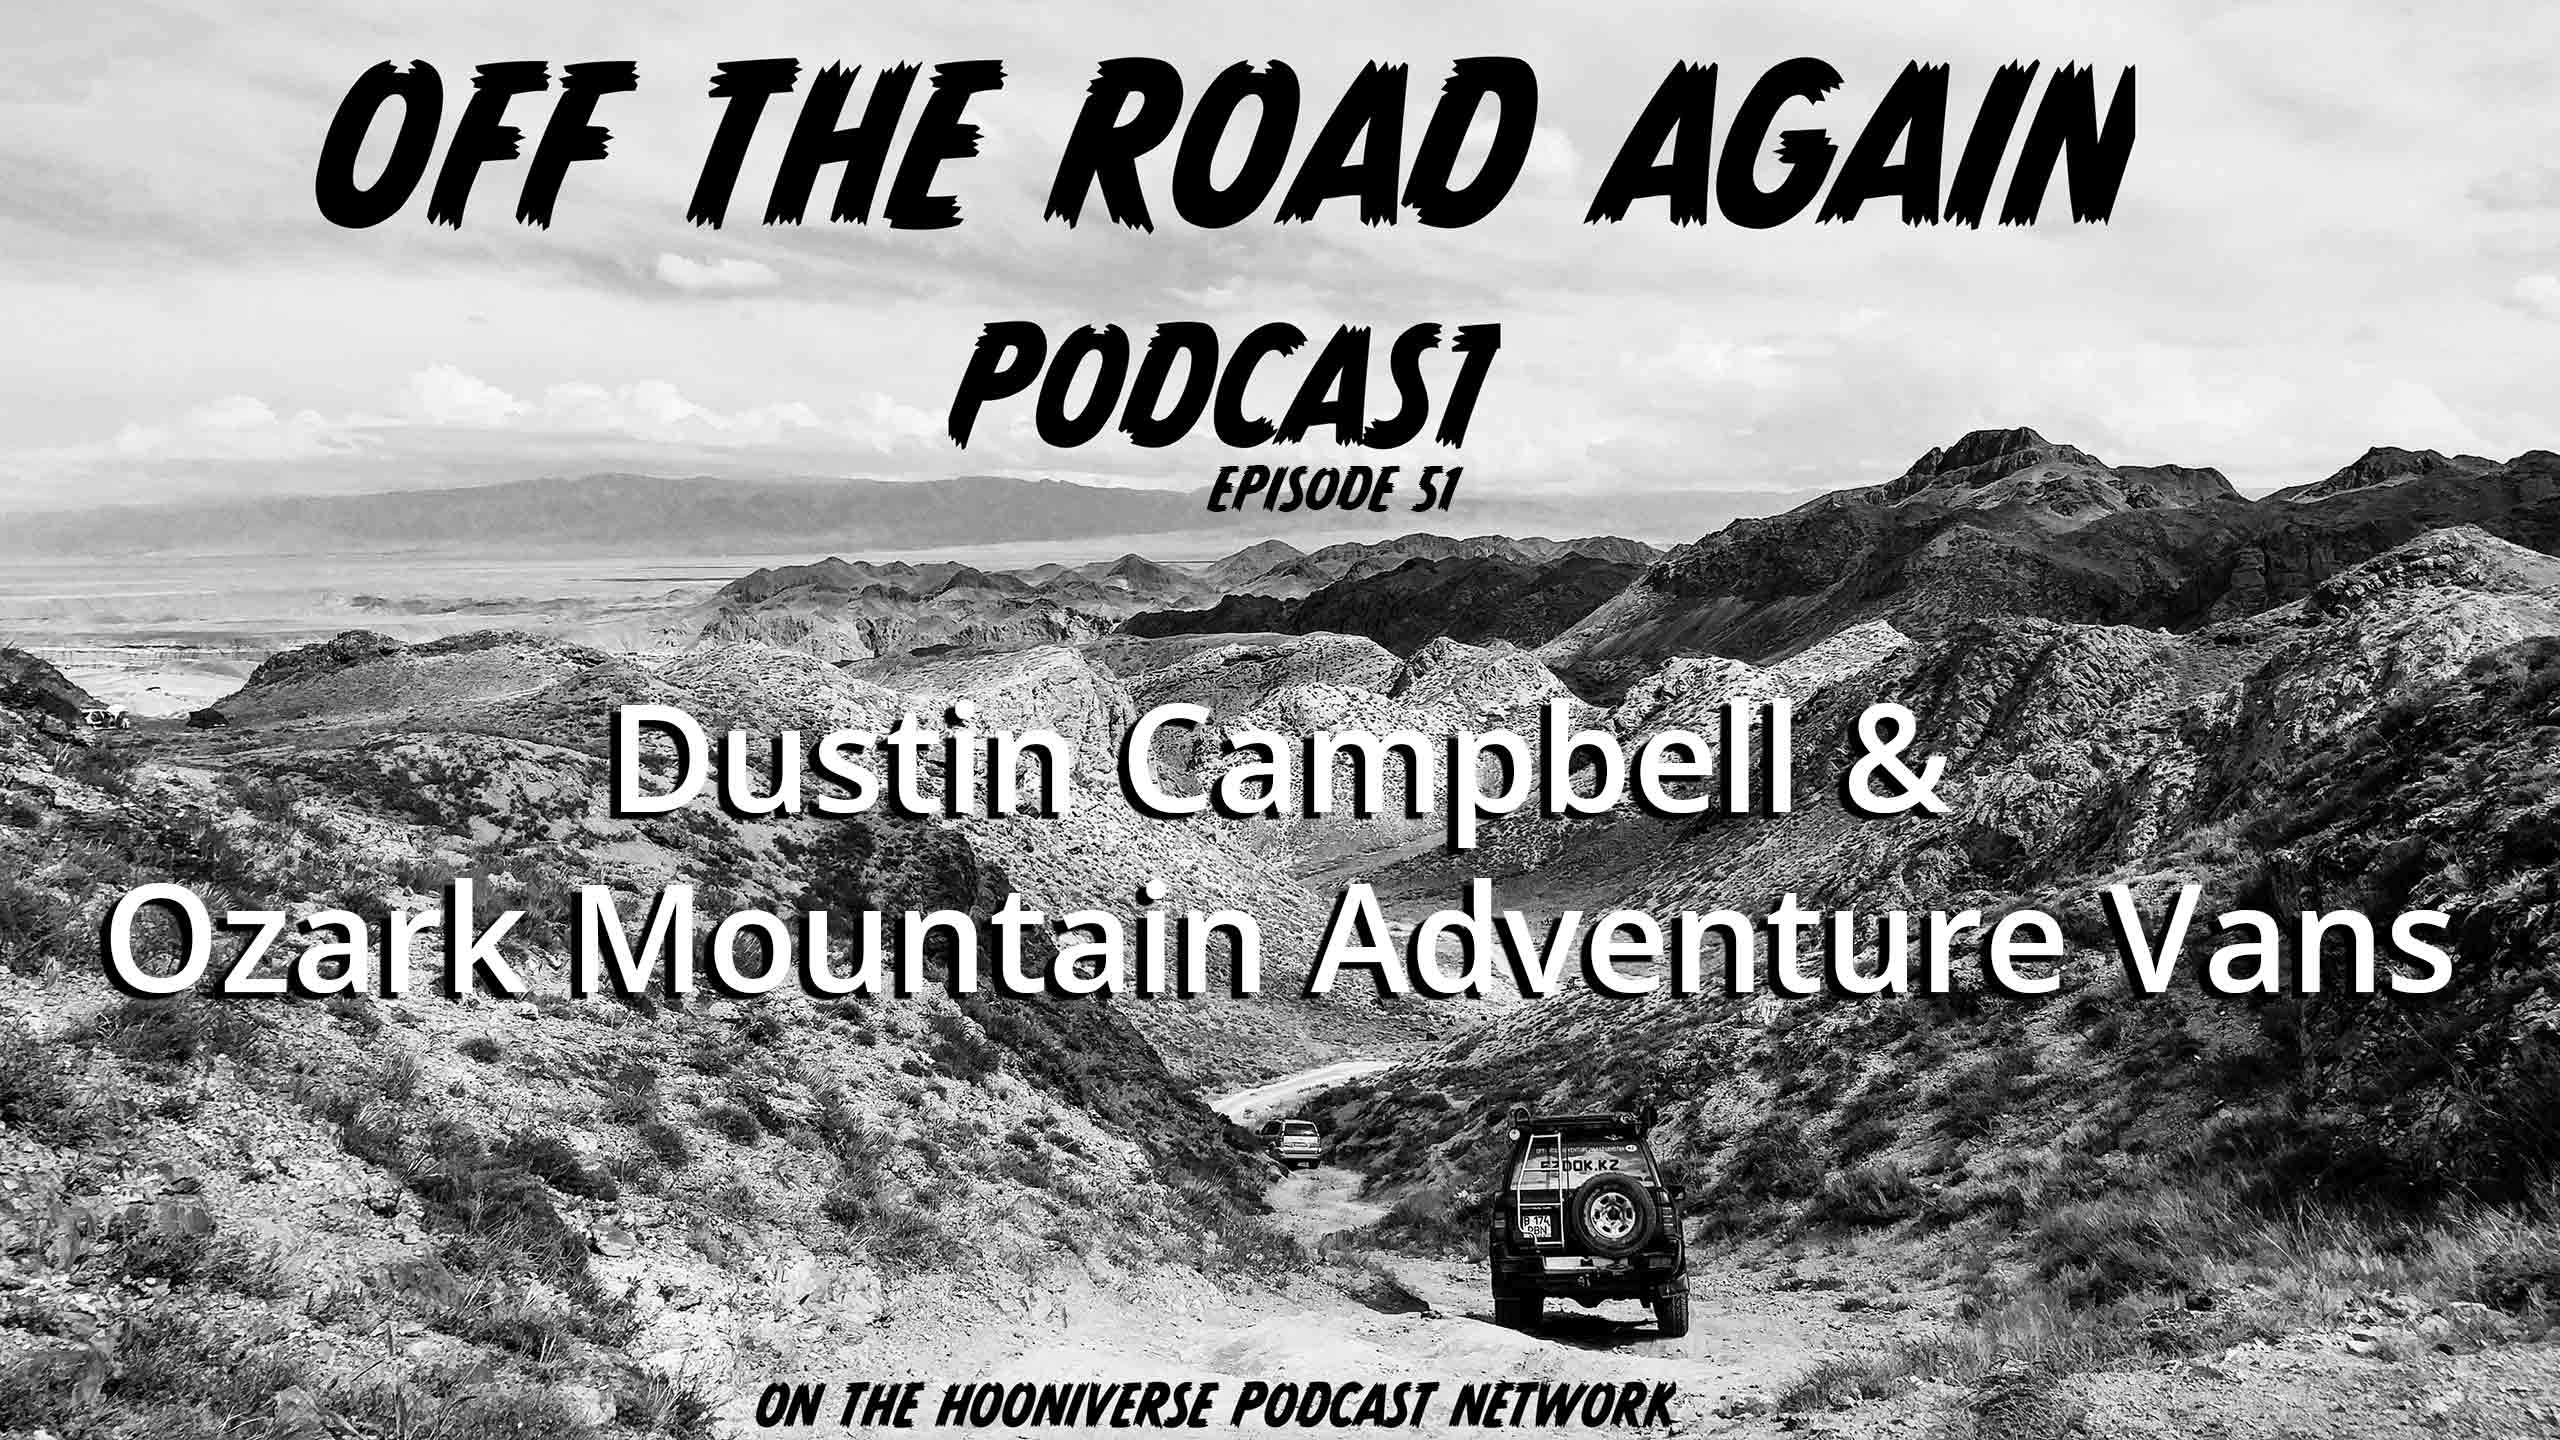 Dustin-Campbell-Ozark-Mountain-Adventure-Vans-Off-The-Road-Again-Podcast-Episode-51